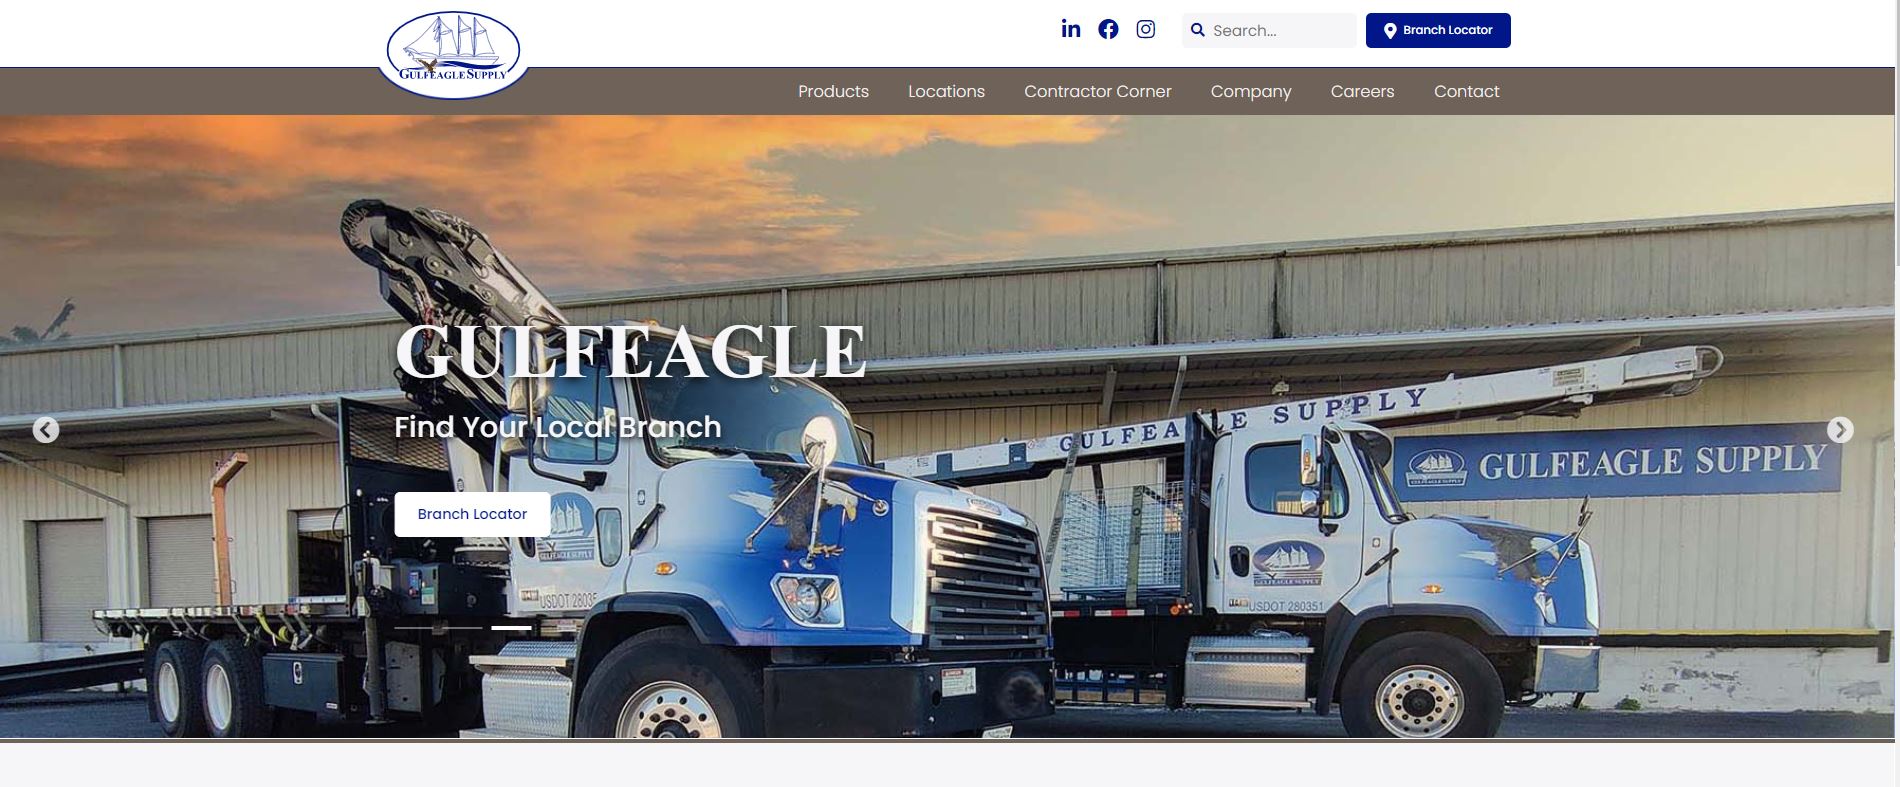 Gulfeagle Supply Launches New Website